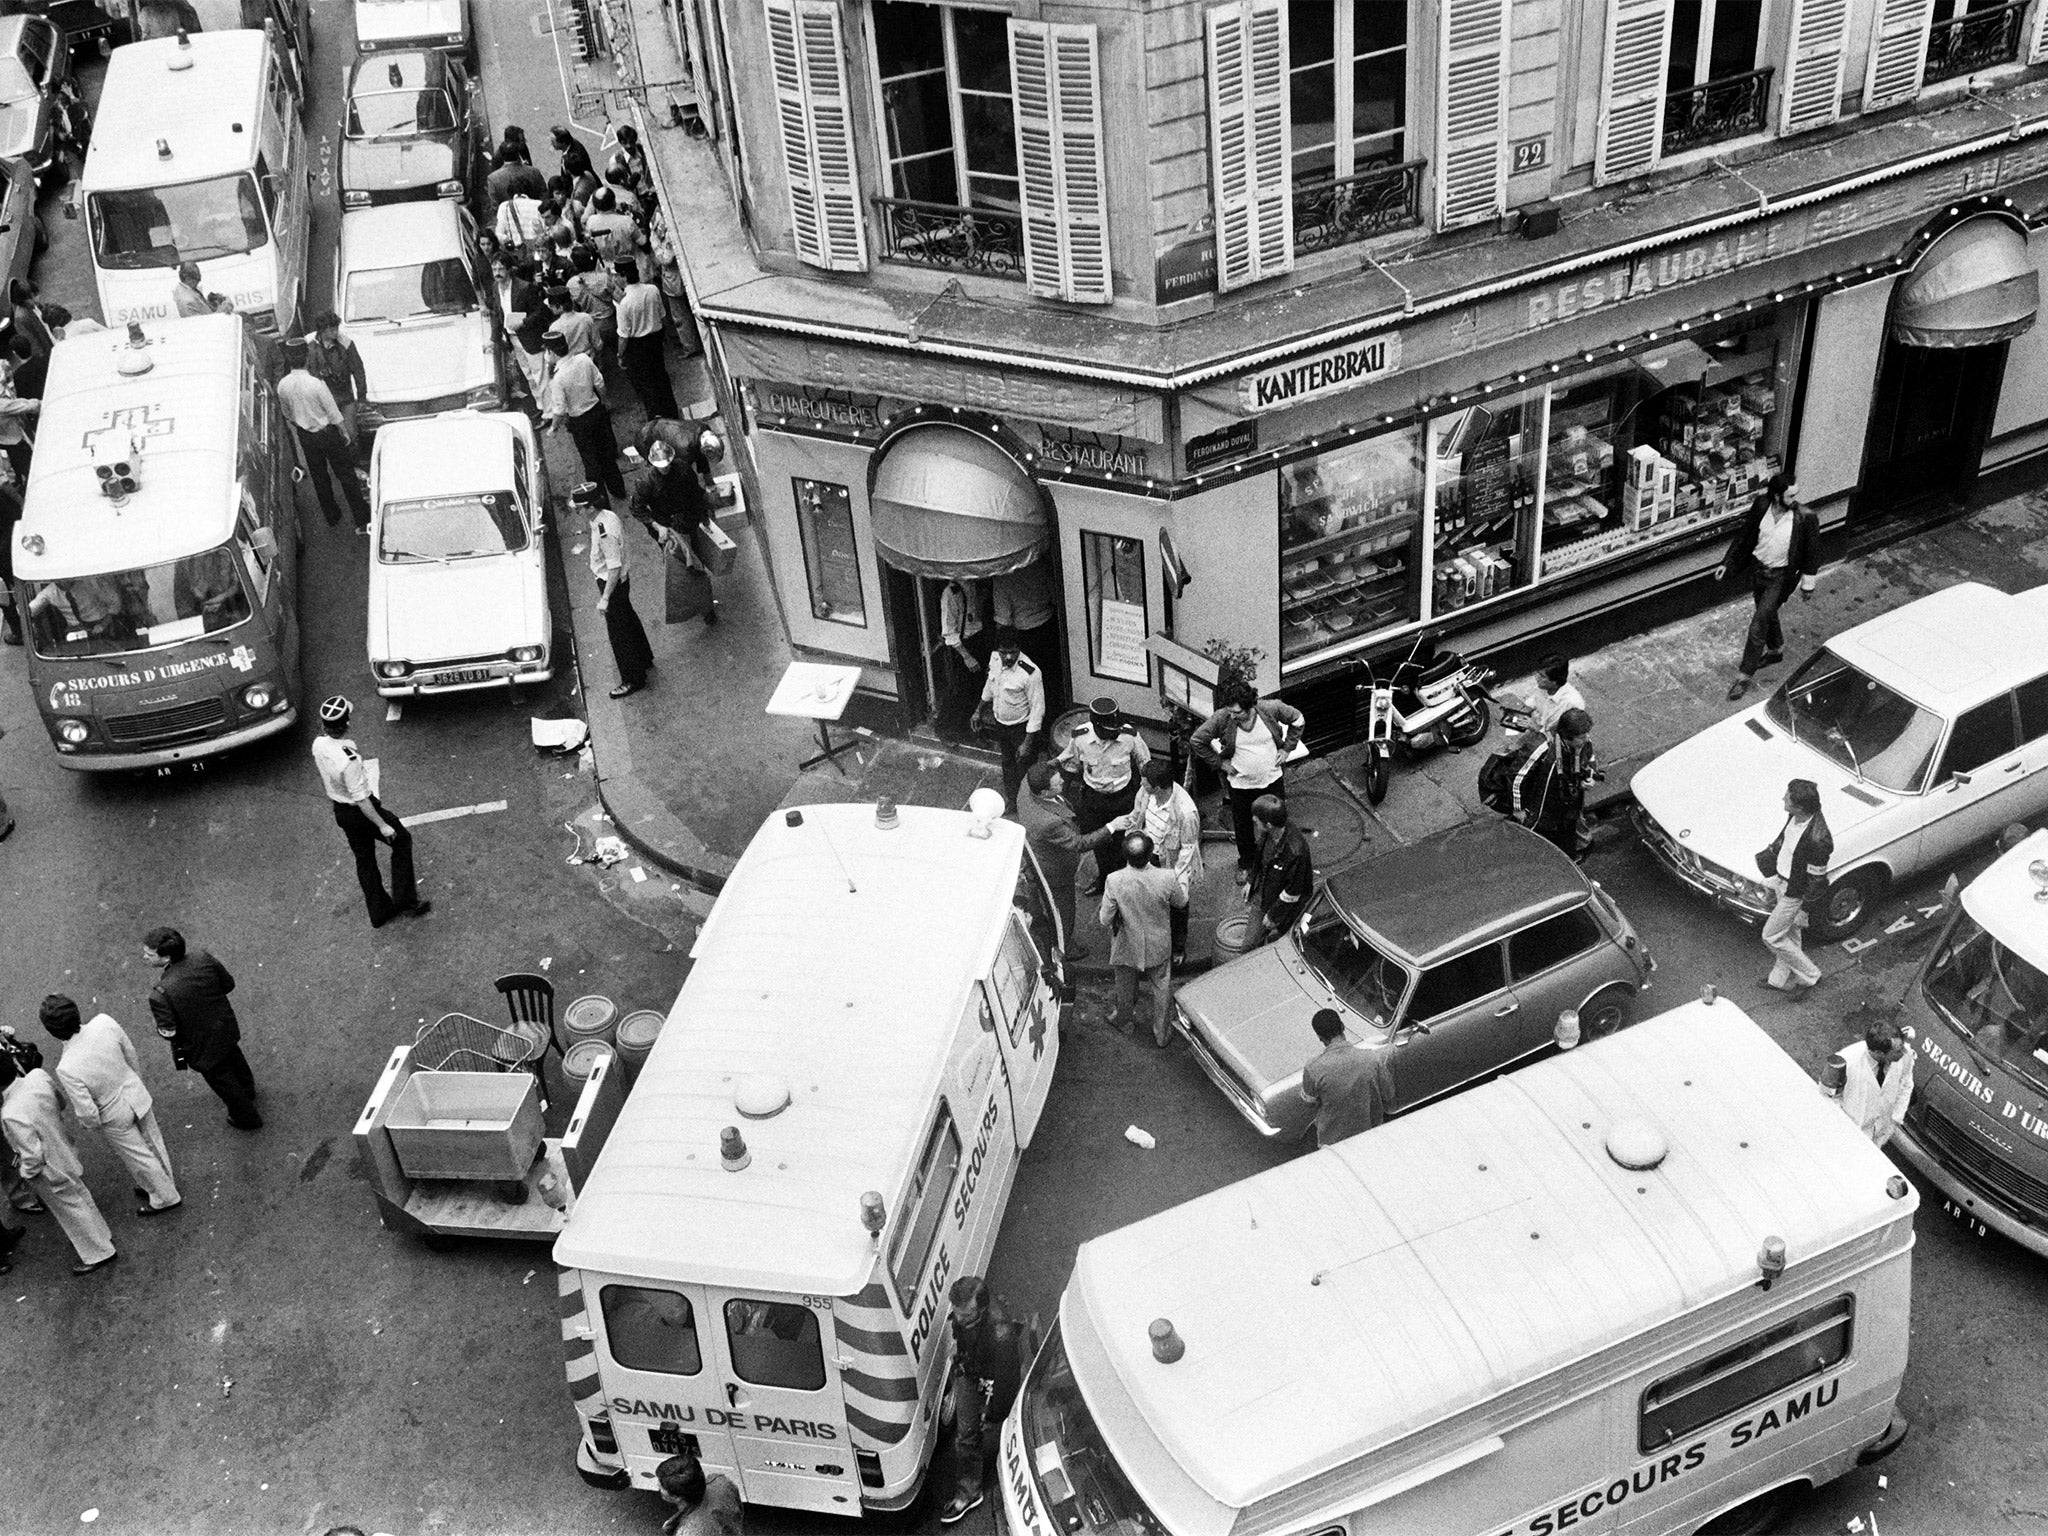 Emergency services vehicles surround Chez Jo Goldenberg during the immediate aftermath of the attack